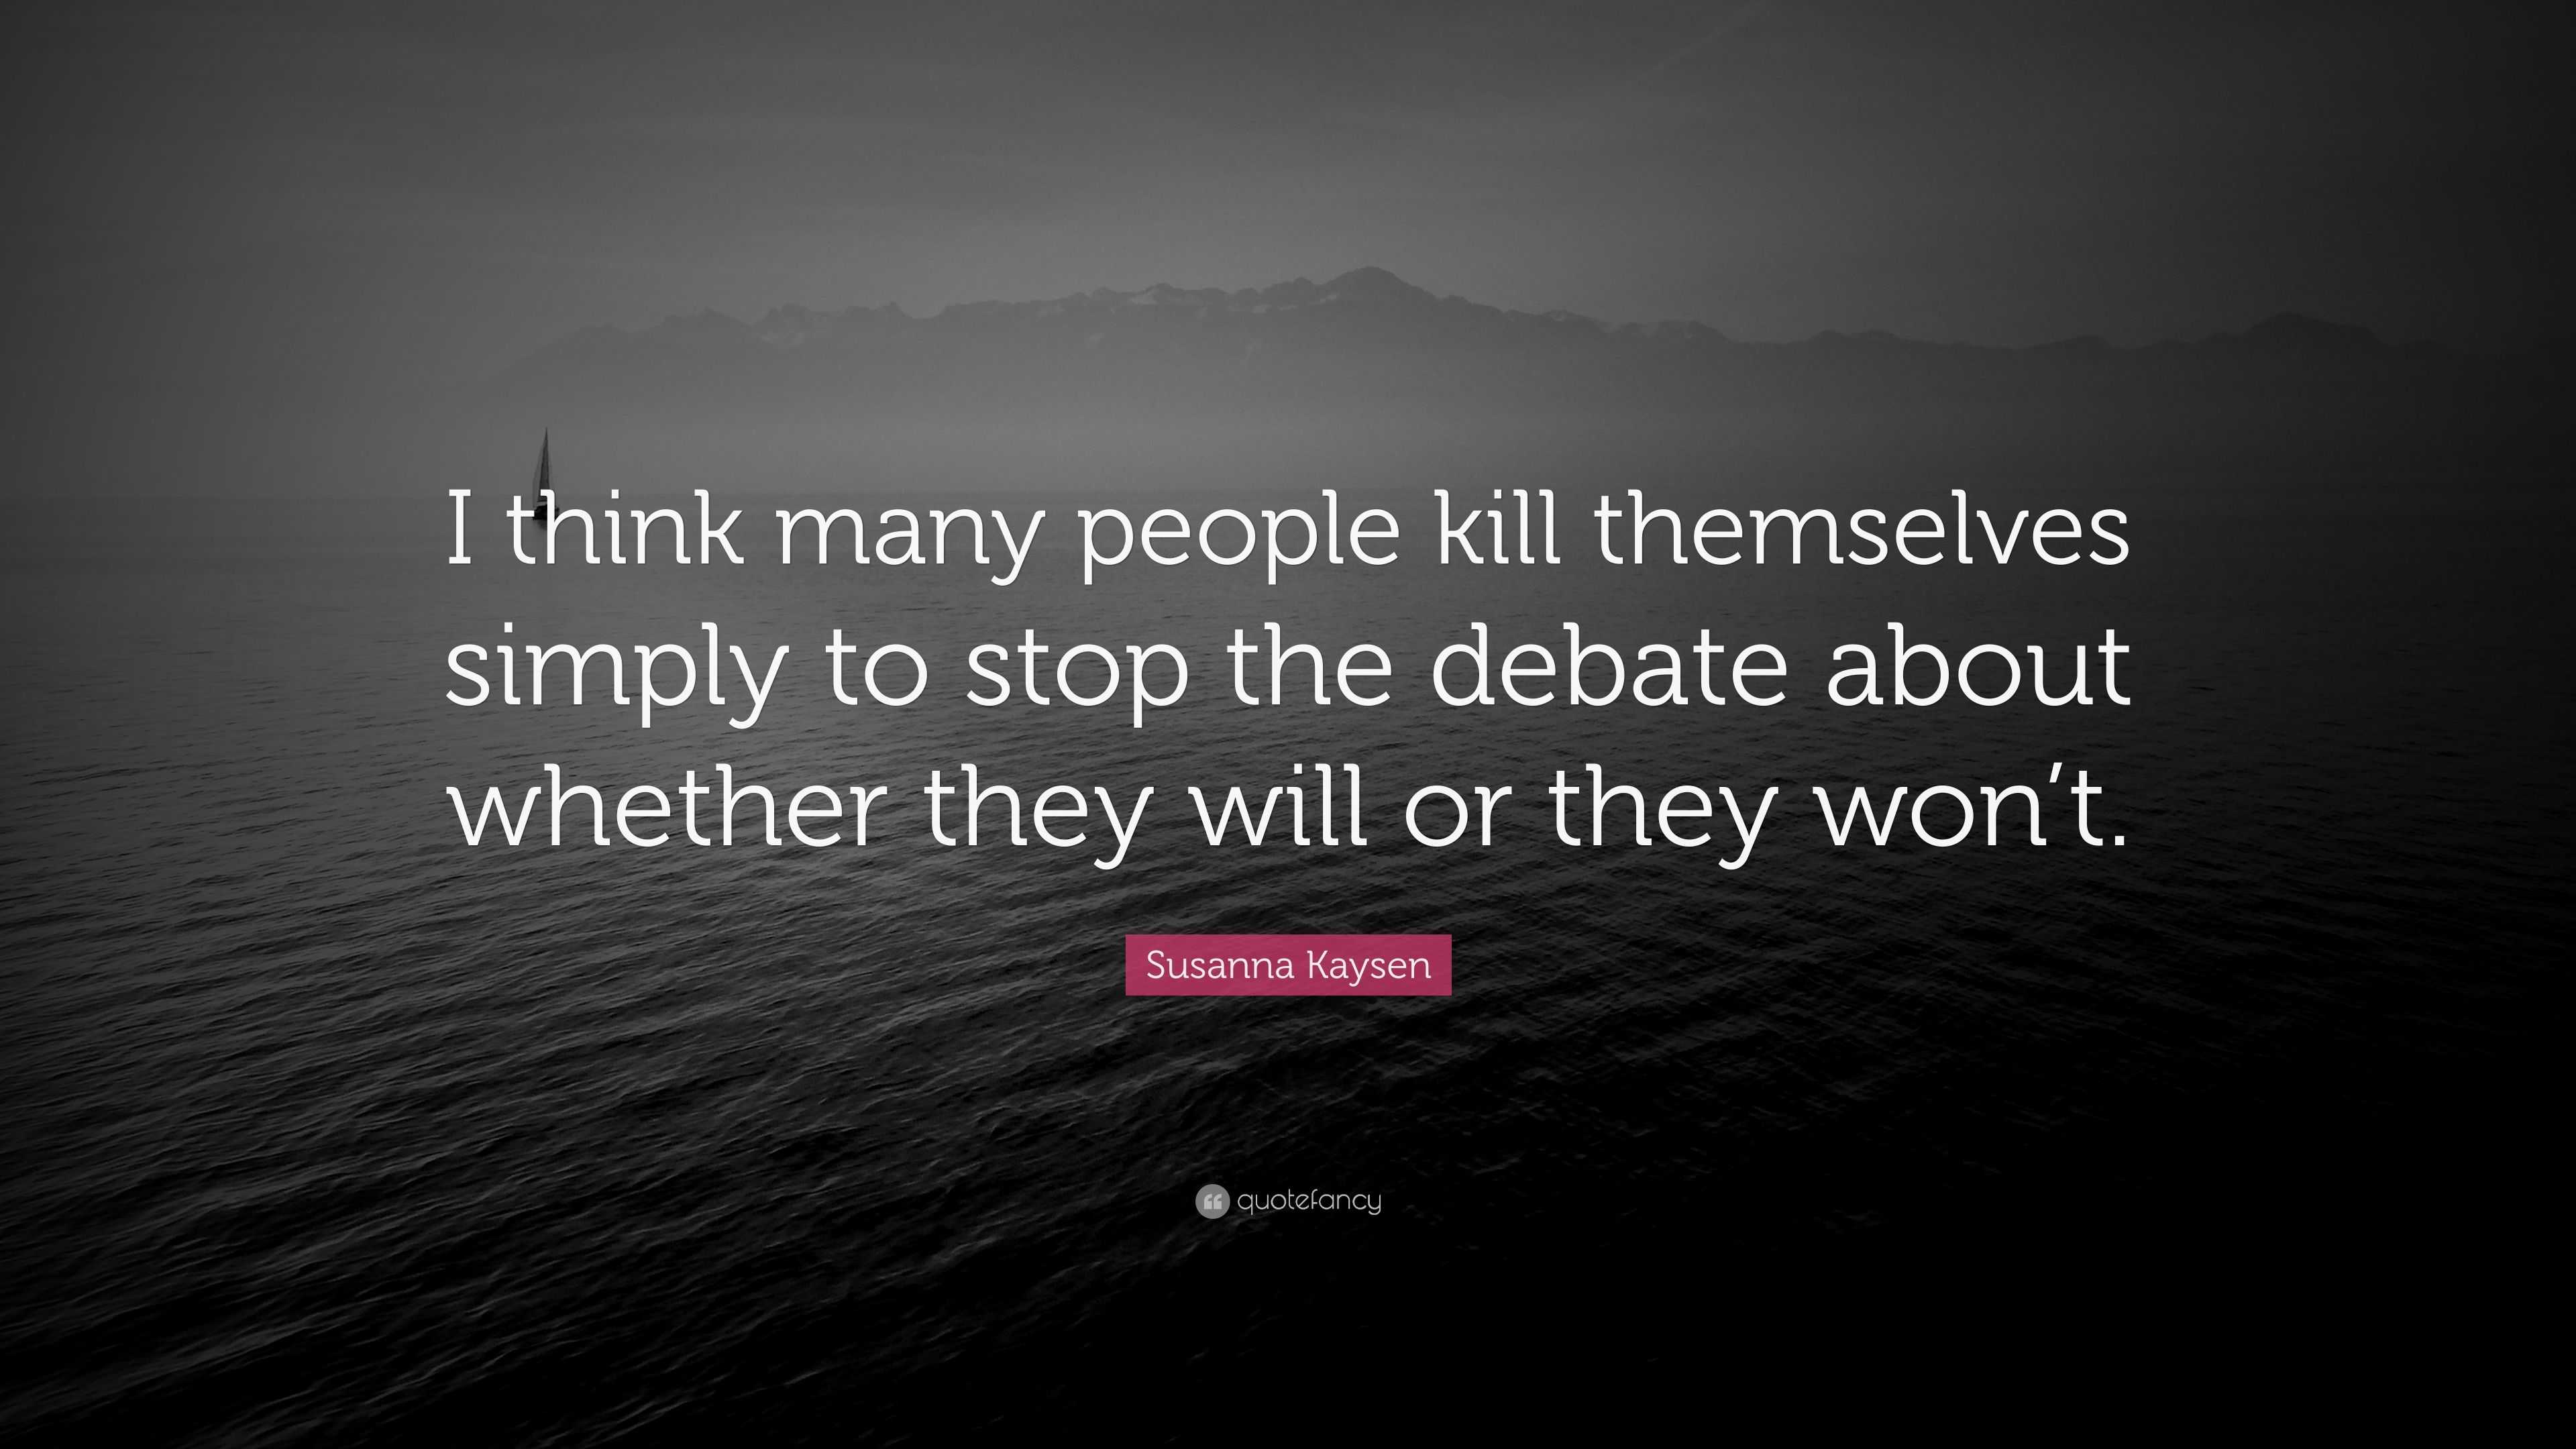 Susanna Kaysen Quote: “I think many people kill themselves simply to ...